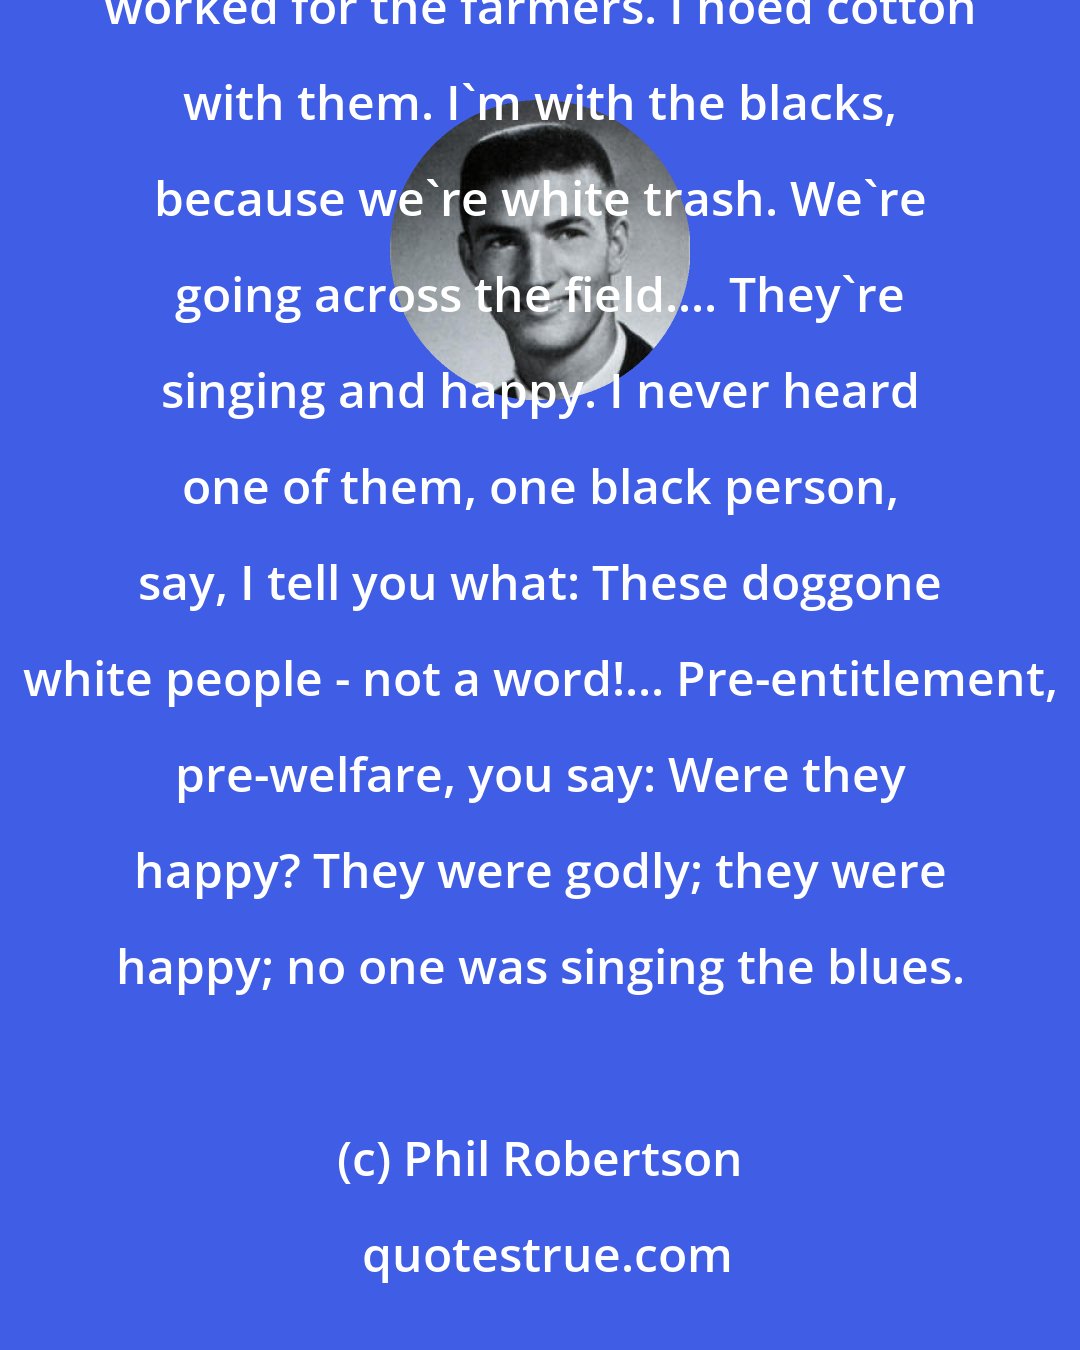 Phil Robertson: I never, with my eyes, saw the mistreatment of any black person. Not once. Where we lived was all farmers. The blacks worked for the farmers. I hoed cotton with them. I'm with the blacks, because we're white trash. We're going across the field.... They're singing and happy. I never heard one of them, one black person, say, I tell you what: These doggone white people - not a word!... Pre-entitlement, pre-welfare, you say: Were they happy? They were godly; they were happy; no one was singing the blues.